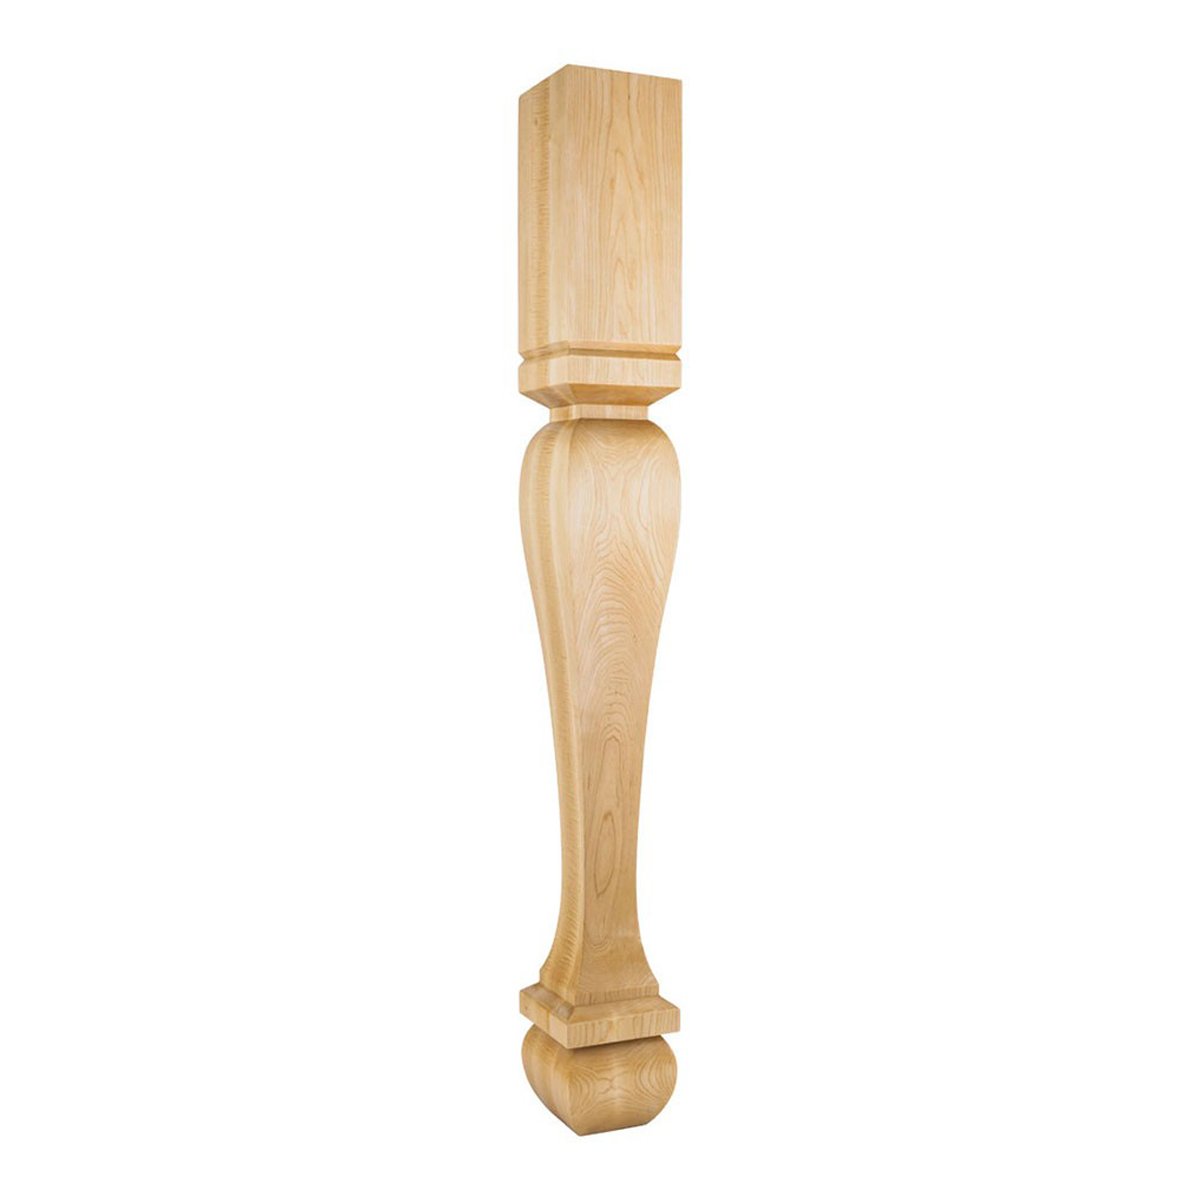 Hardware Resources 5" x 5" x 42" Square White Birch Post / Table Leg with Foot-DirectSinks